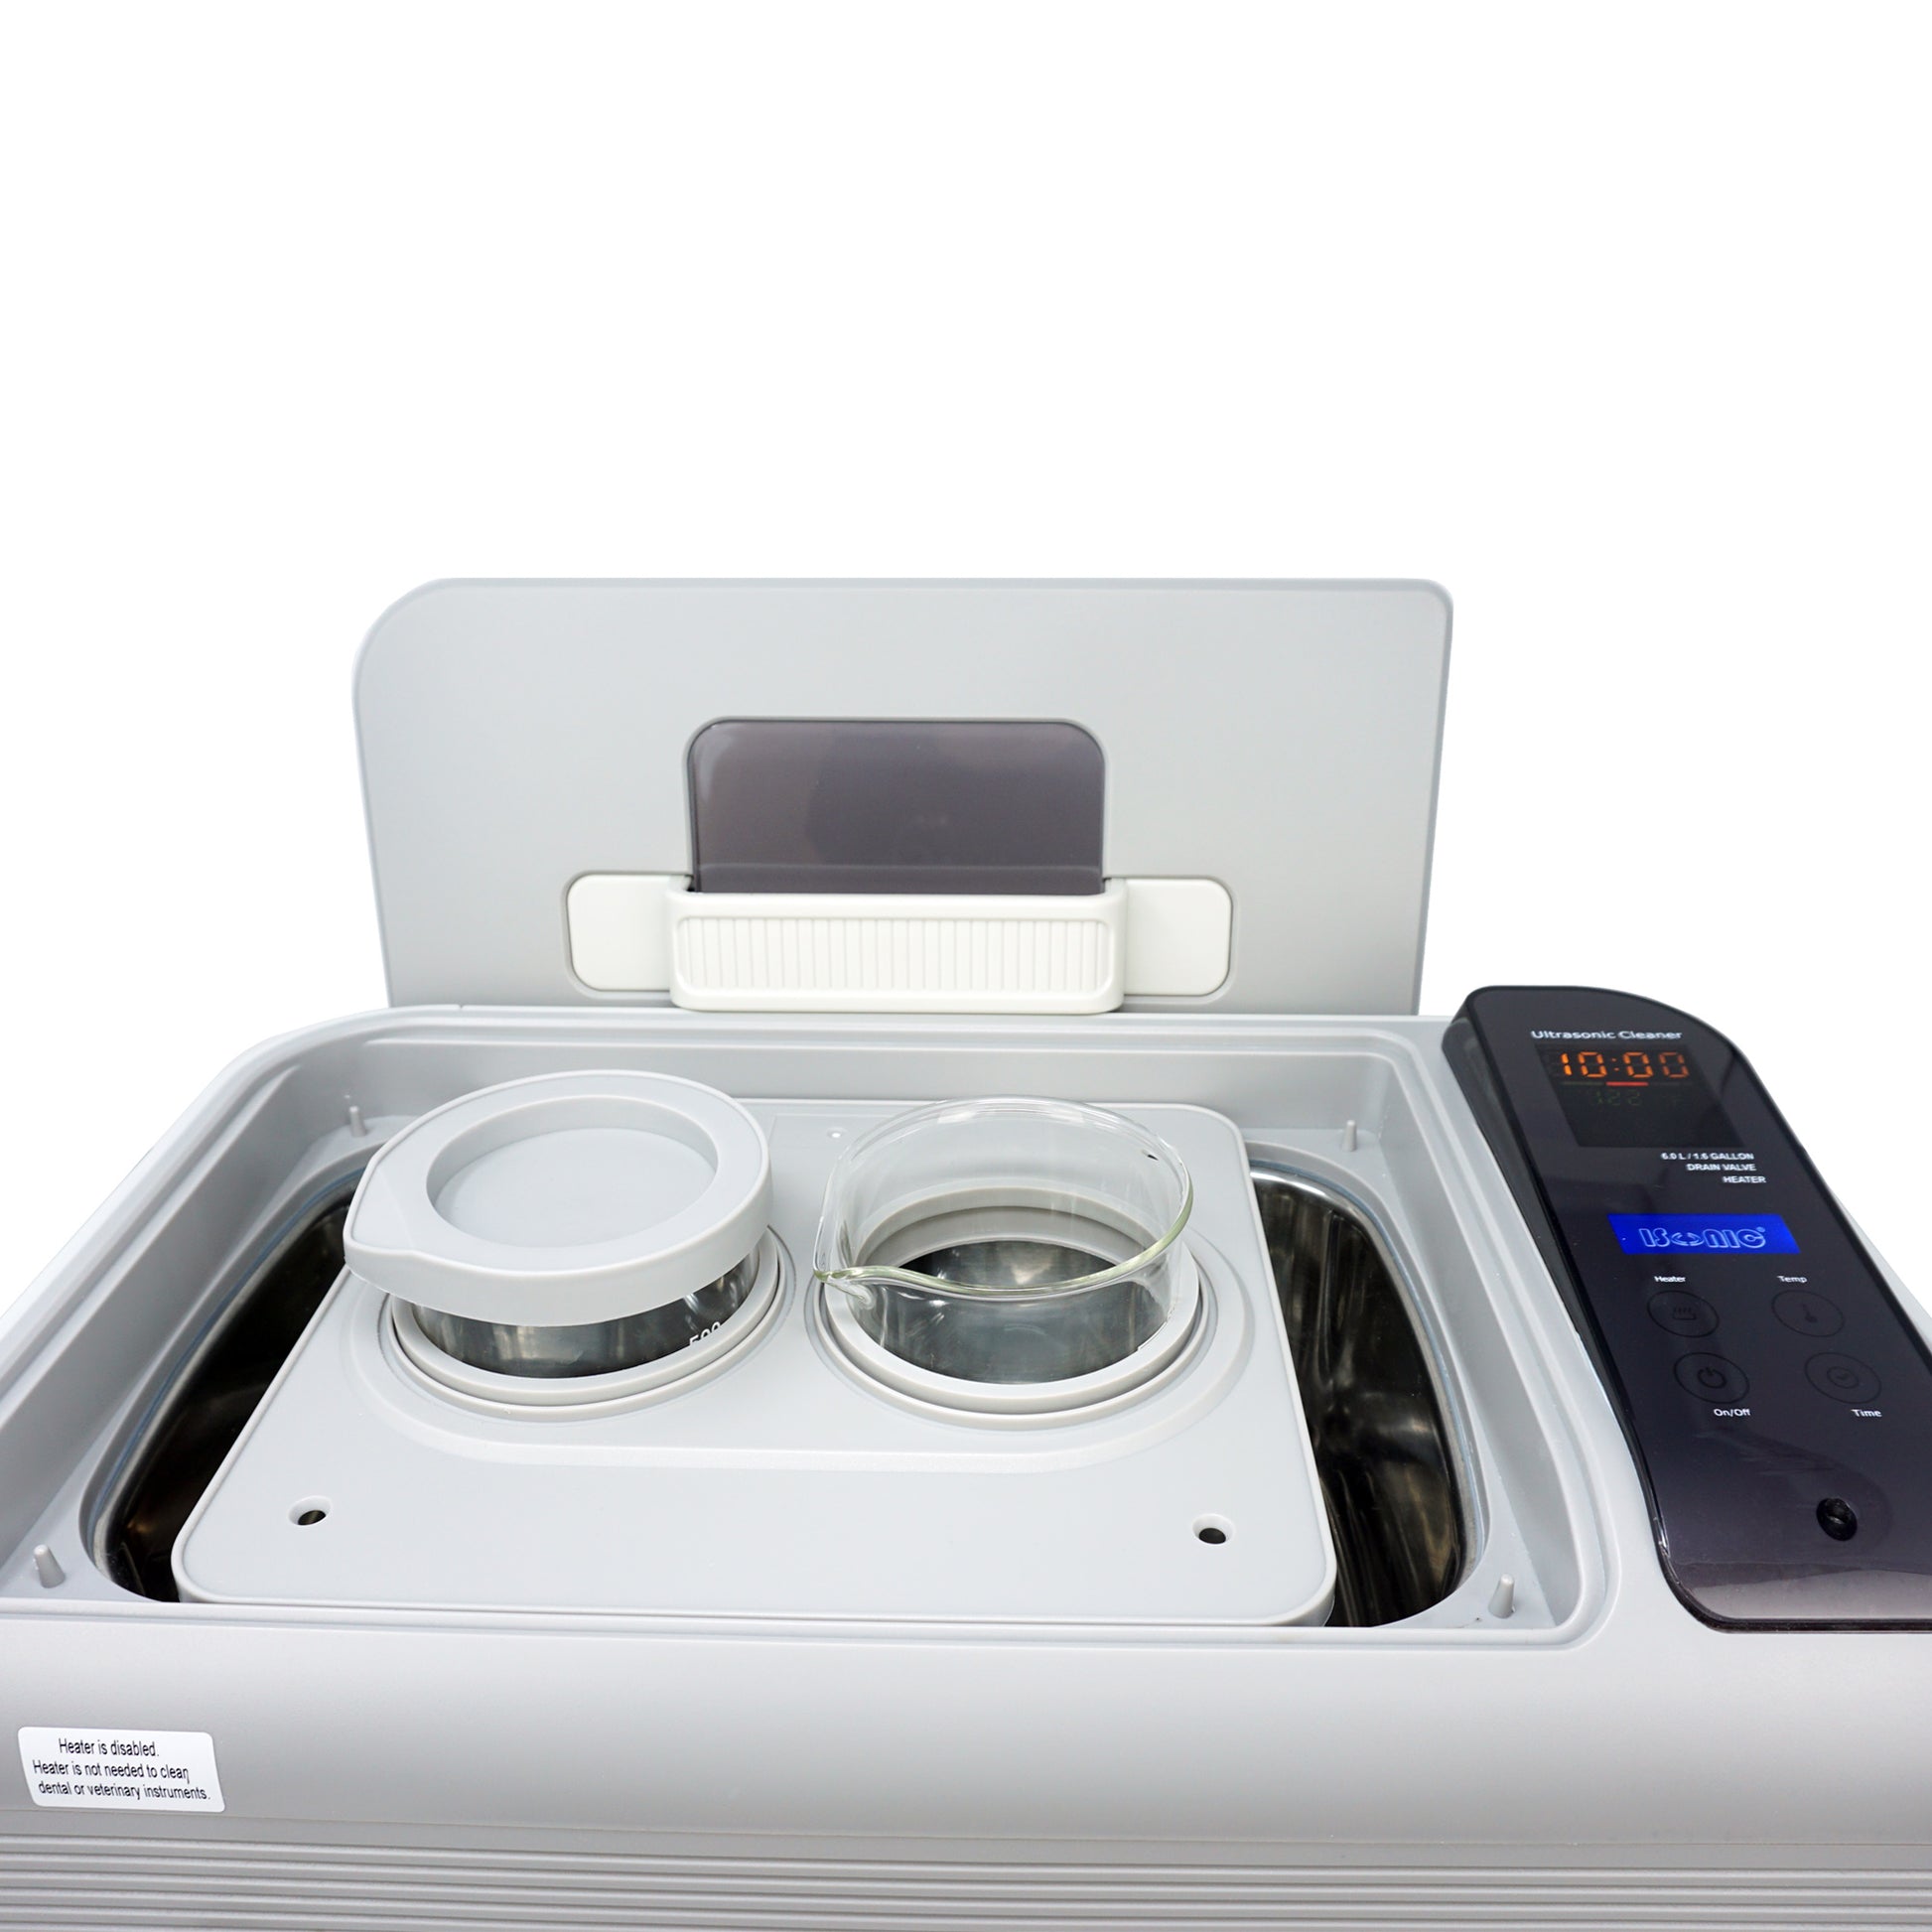 P4831 | iSonic® Ultrasonic Cleaner, 0.8Gal/3L, with a supersized 80W  ultrasonic stack transducer, plastic basket, heater, drain